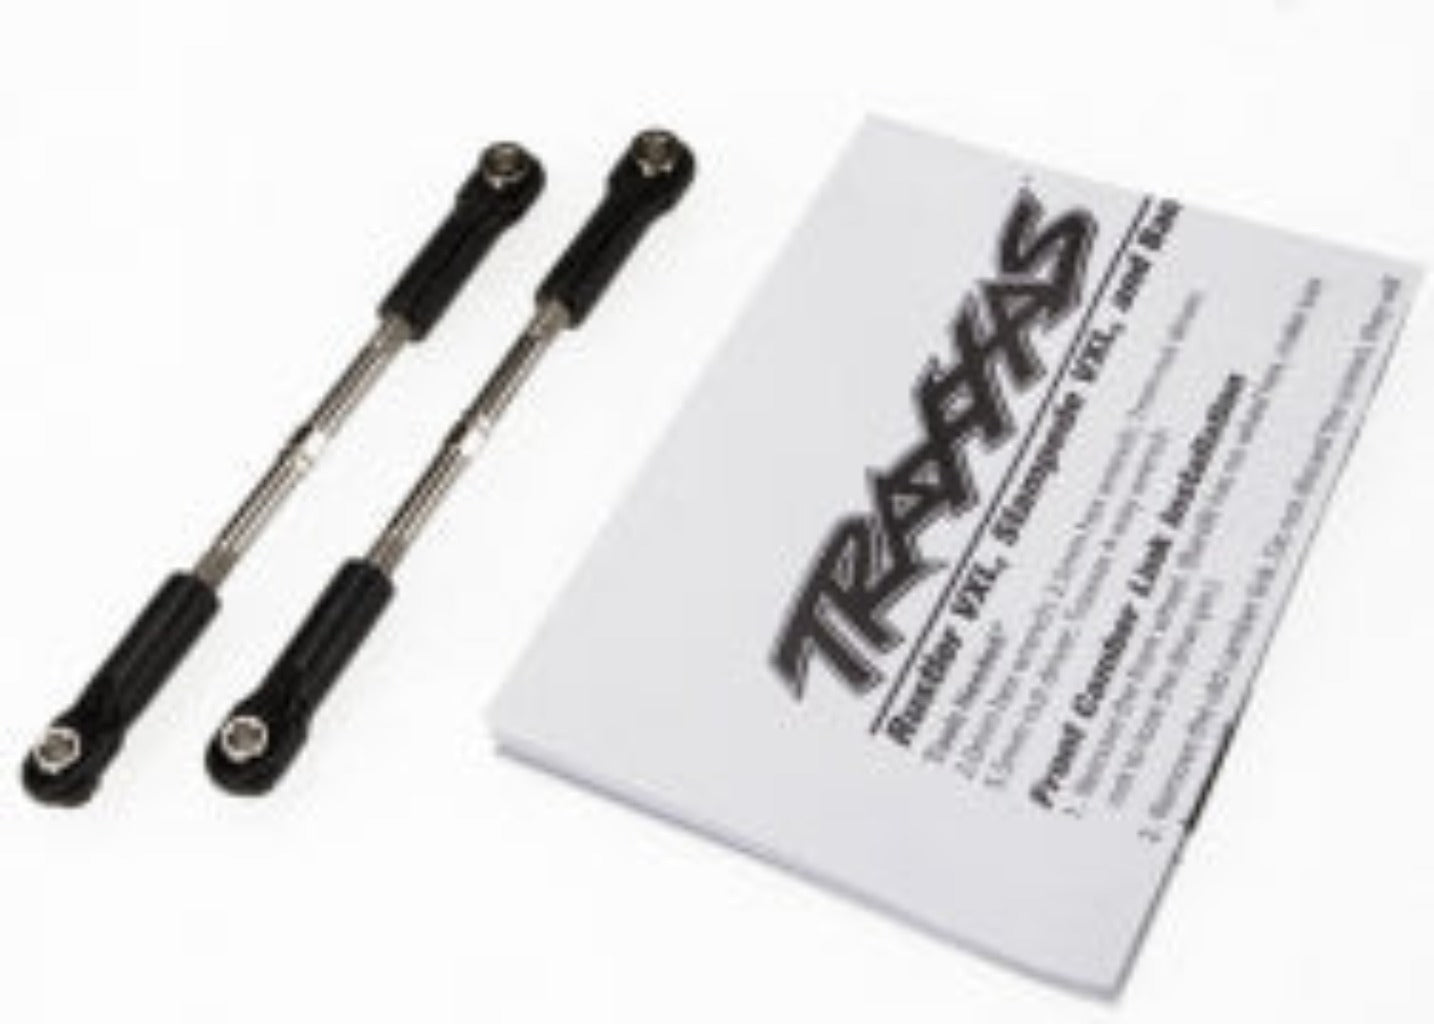 3645 Turnbuckles, toe link, 61mm (96mm center to center) (2) (assembled with rod ends and hollow balls) (fits Stampede®)